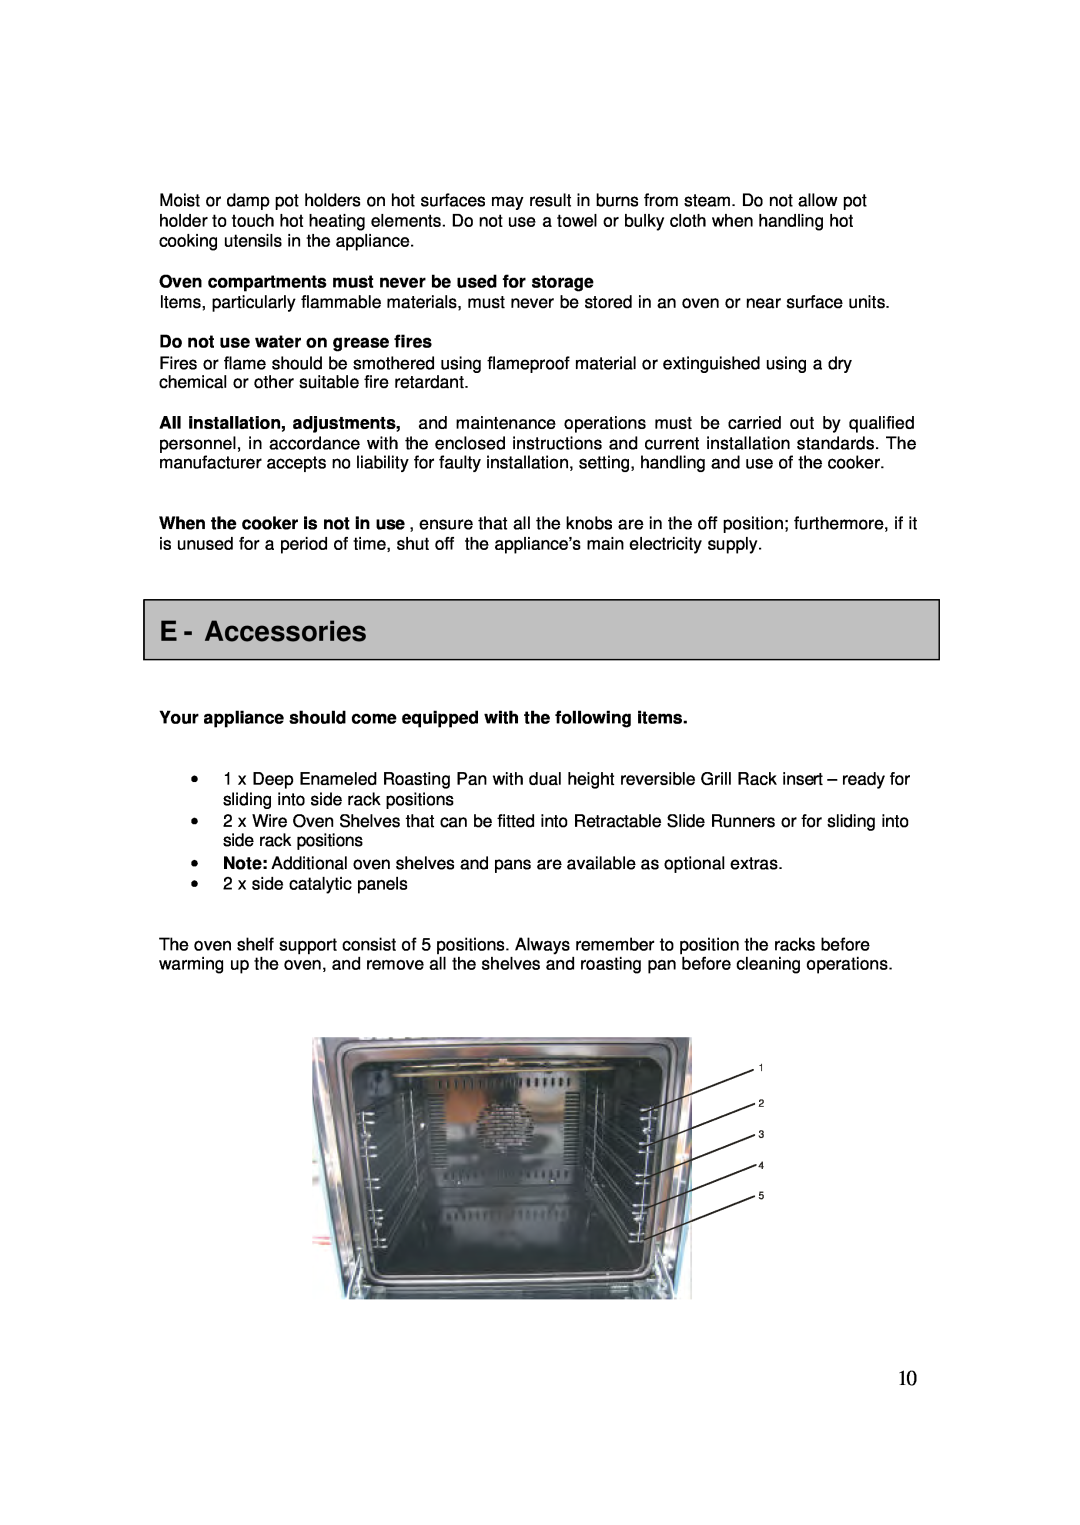 AEG 4006G-M user manual E - Accessories, Oven compartments must never be used for storage, Do not use water on grease fires 